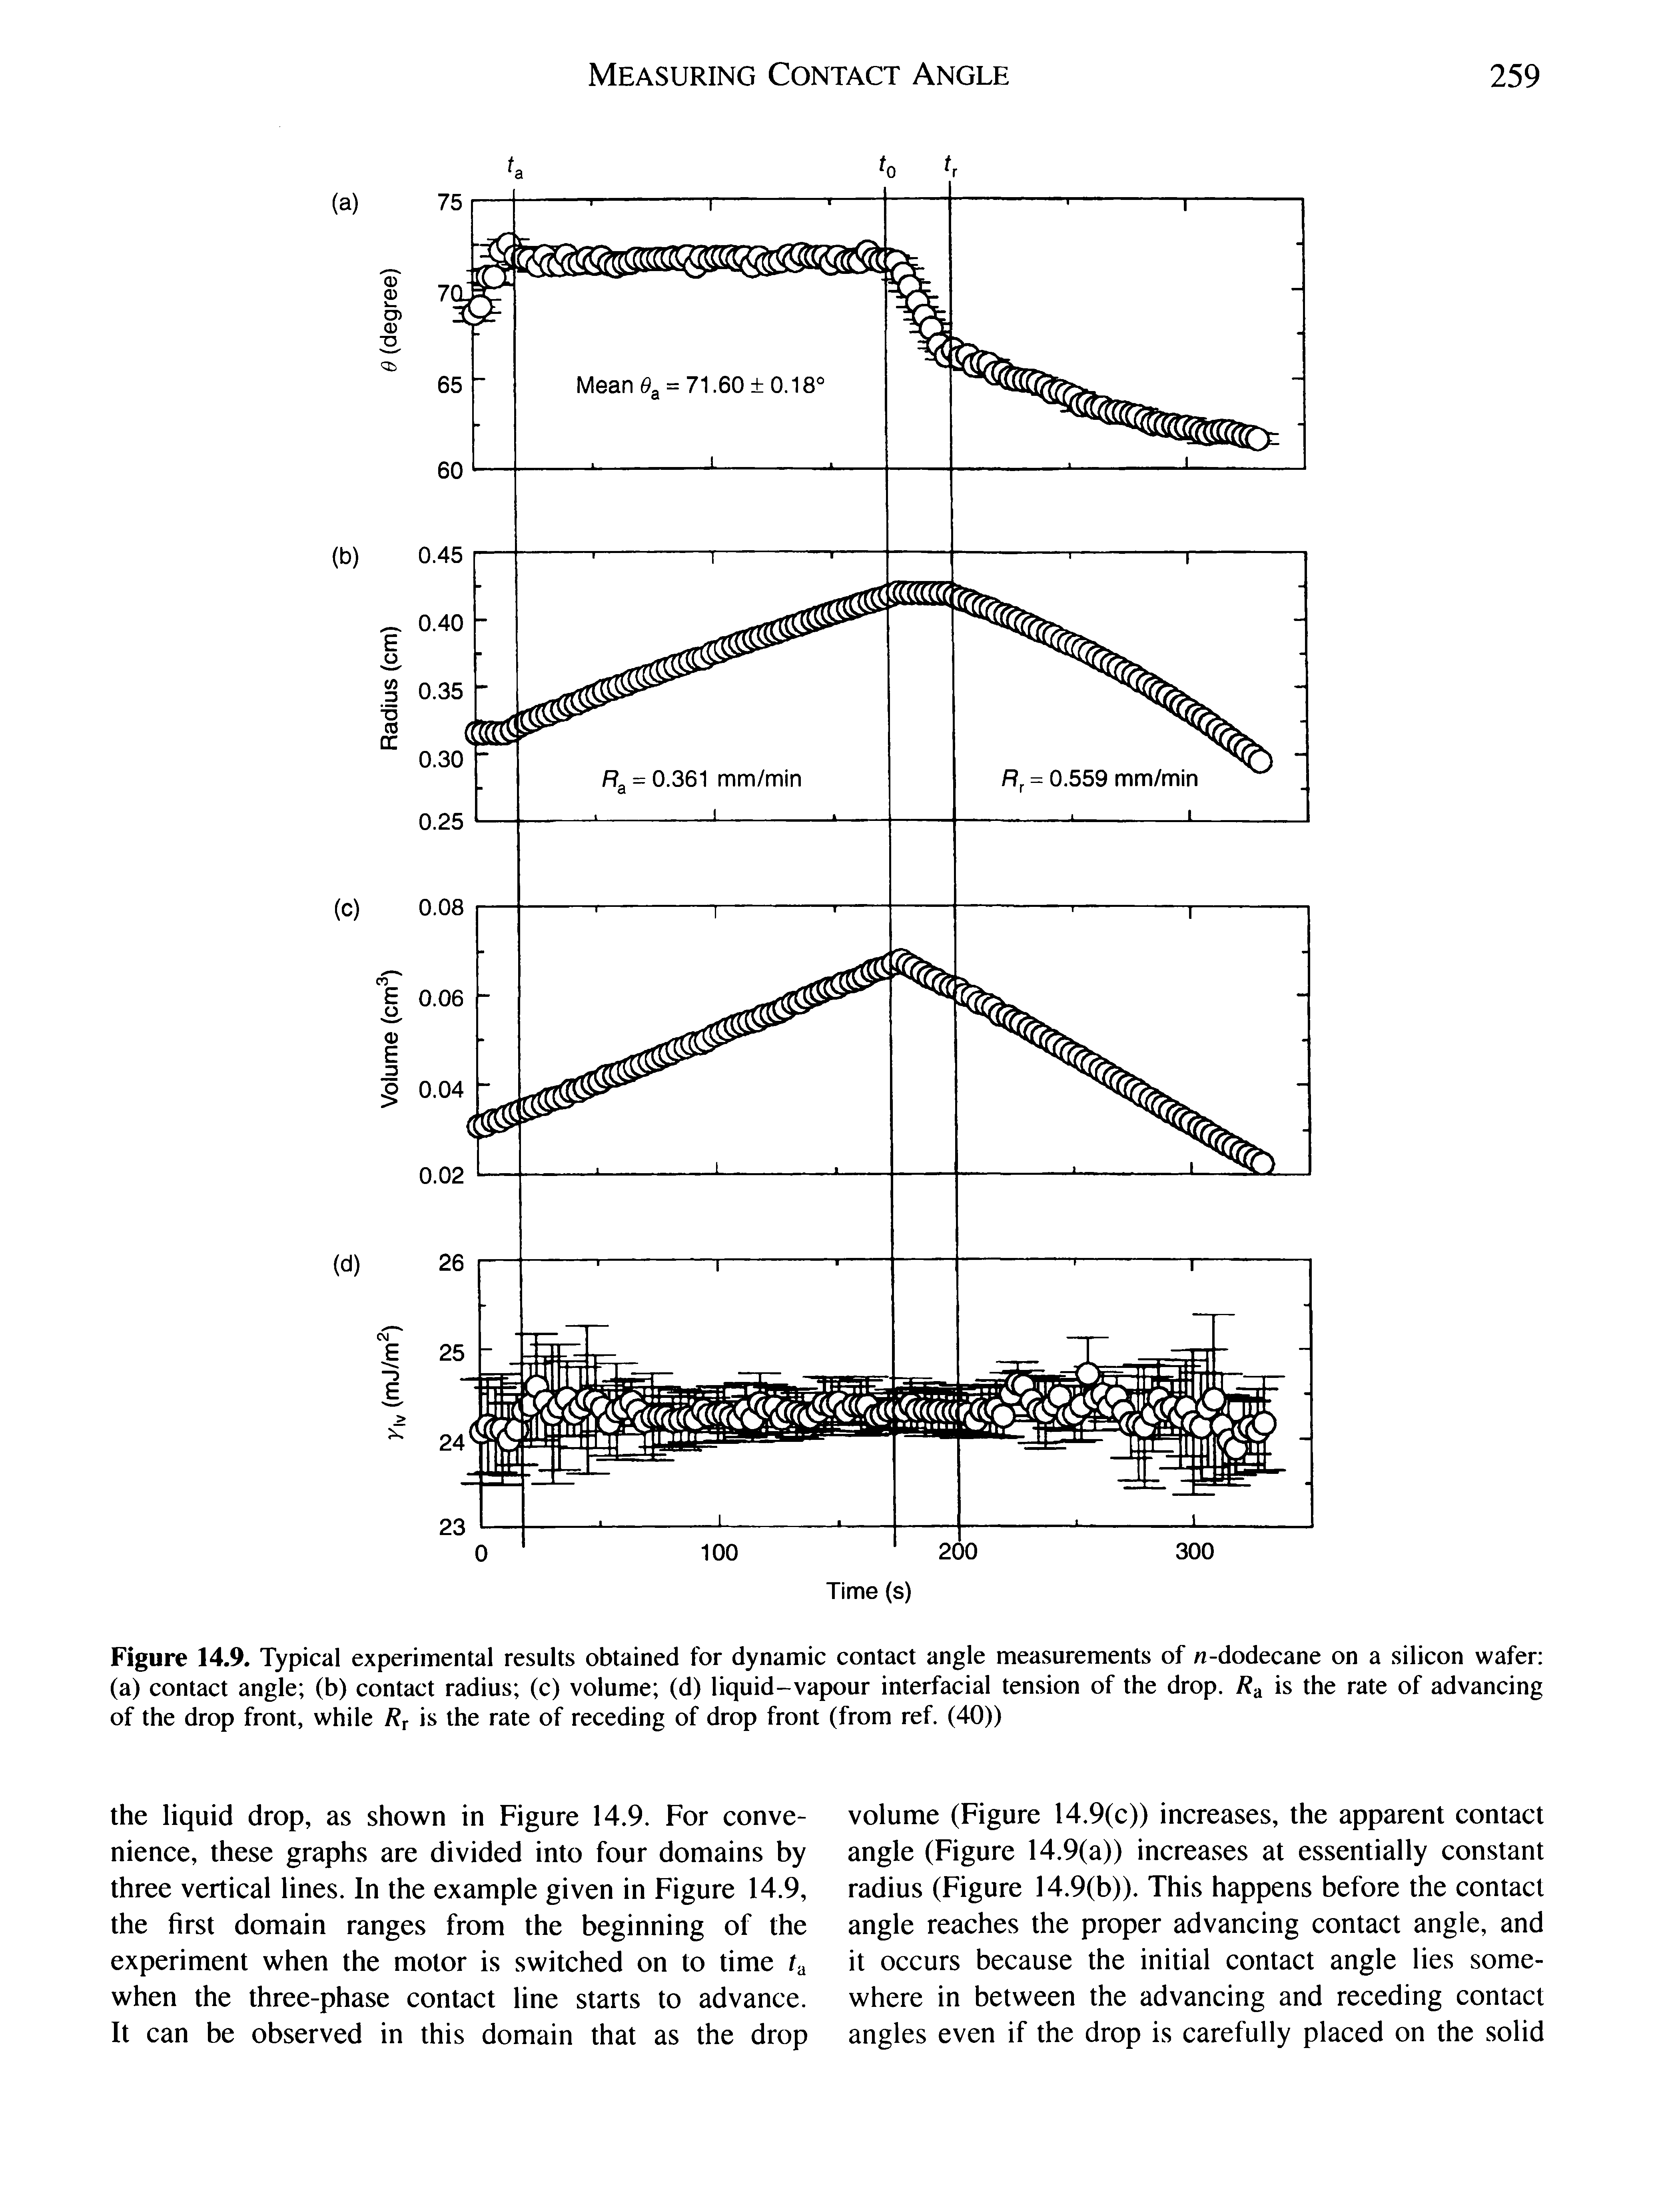 Figure 14.9. Typical experimental results obtained for dynamic contact angle measurements of -dodecane on a silicon wafer (a) contact angle (b) contact radius (c) volume (d) liquid-vapour interfacial tension of the drop. / a is the rate of advancing of the drop front, while Rf is the rate of receding of drop front (from ref. (40))...